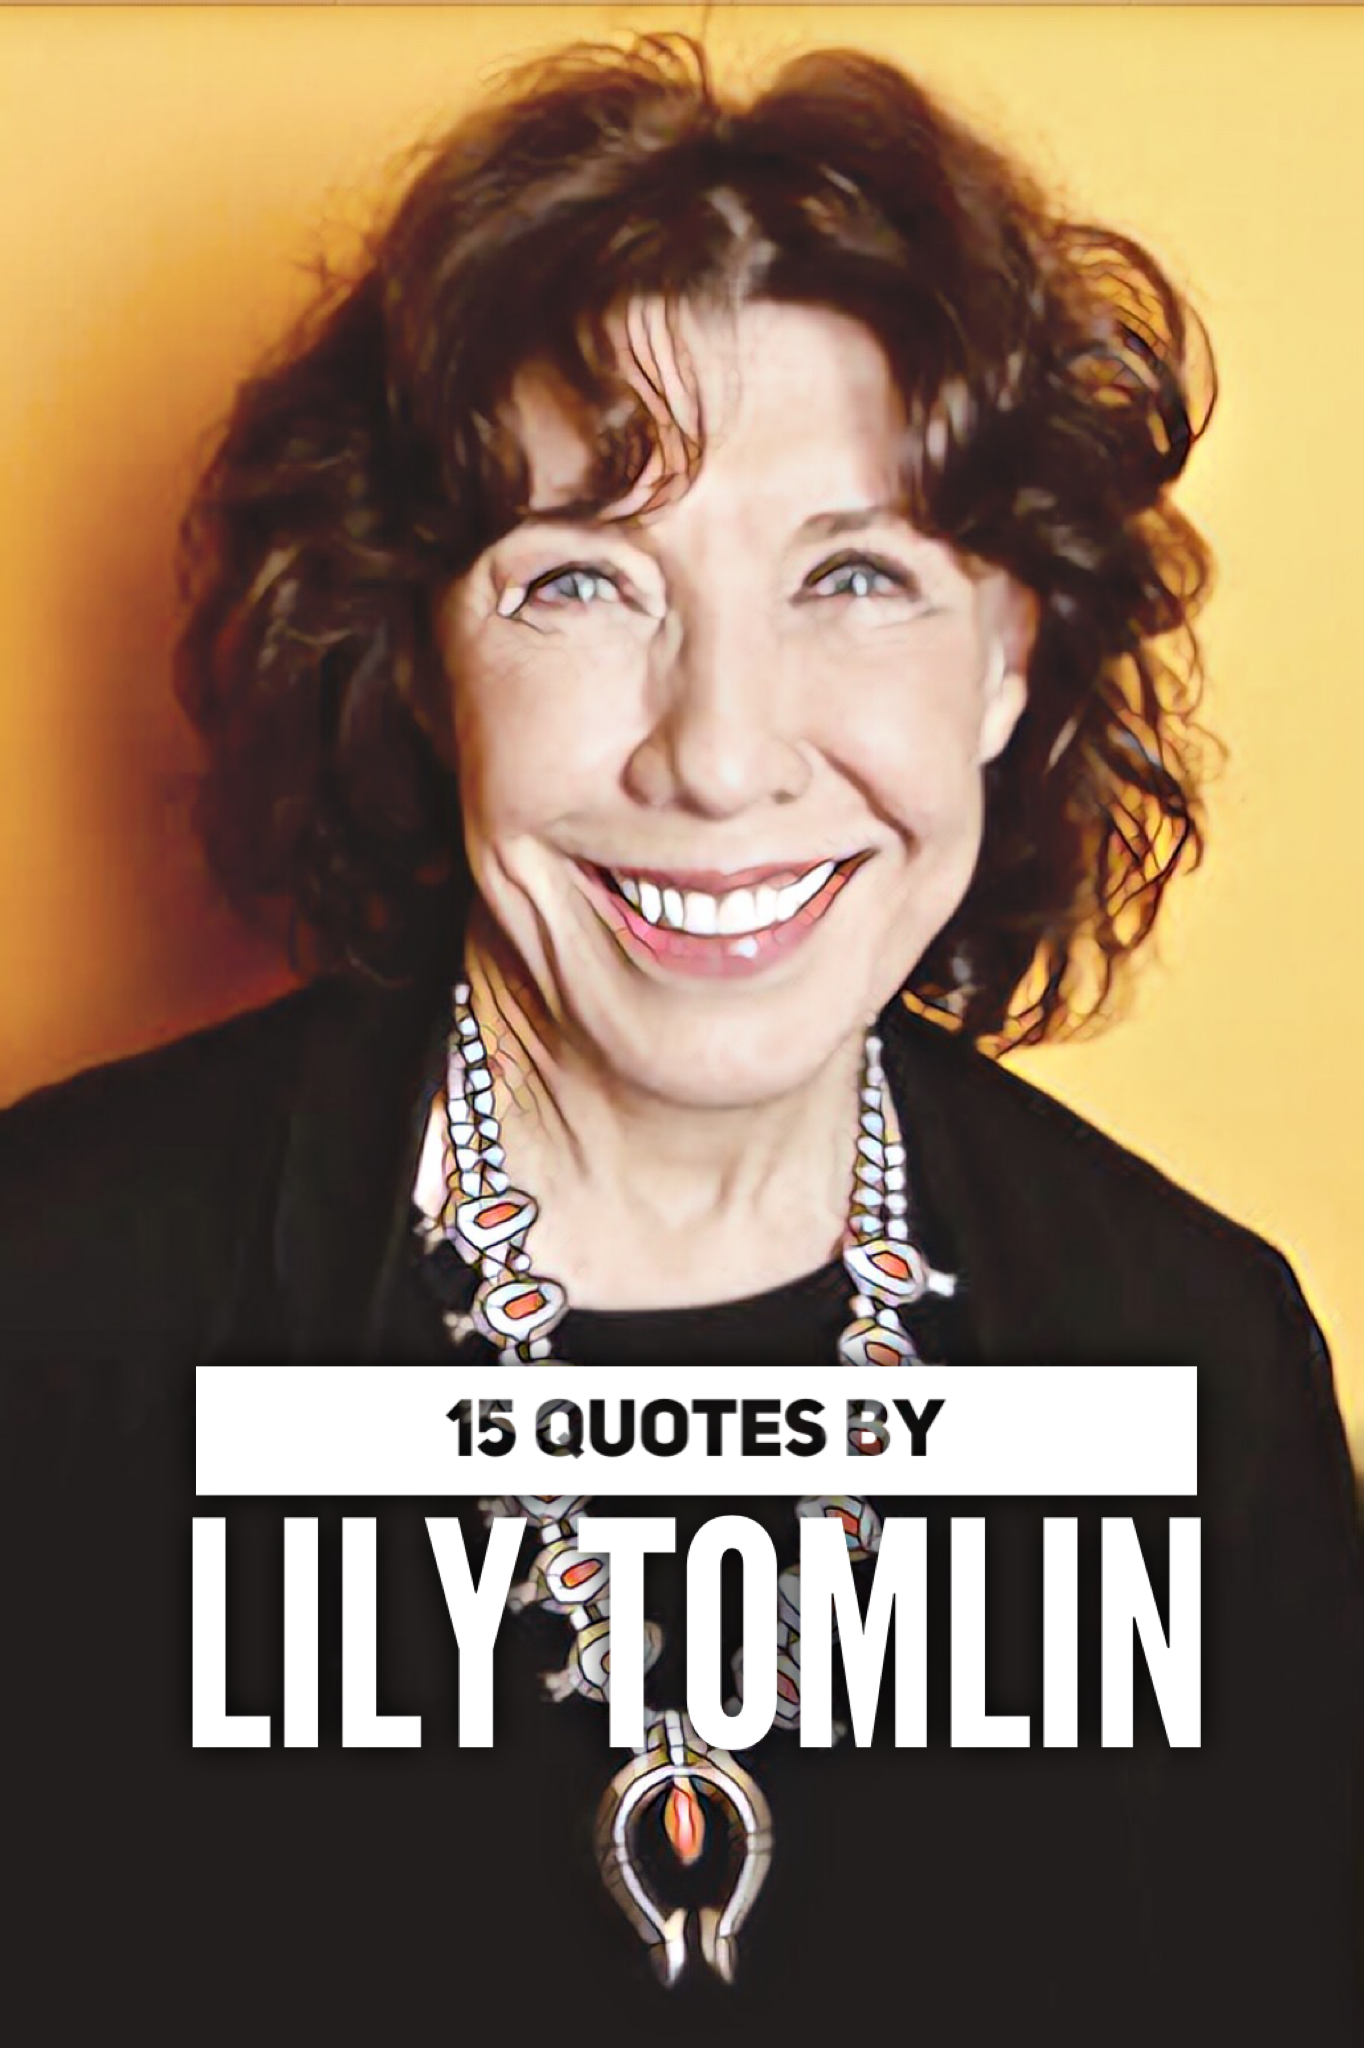 15 Quotes by Lily Tomlin - Roy Sutton1364 x 2048